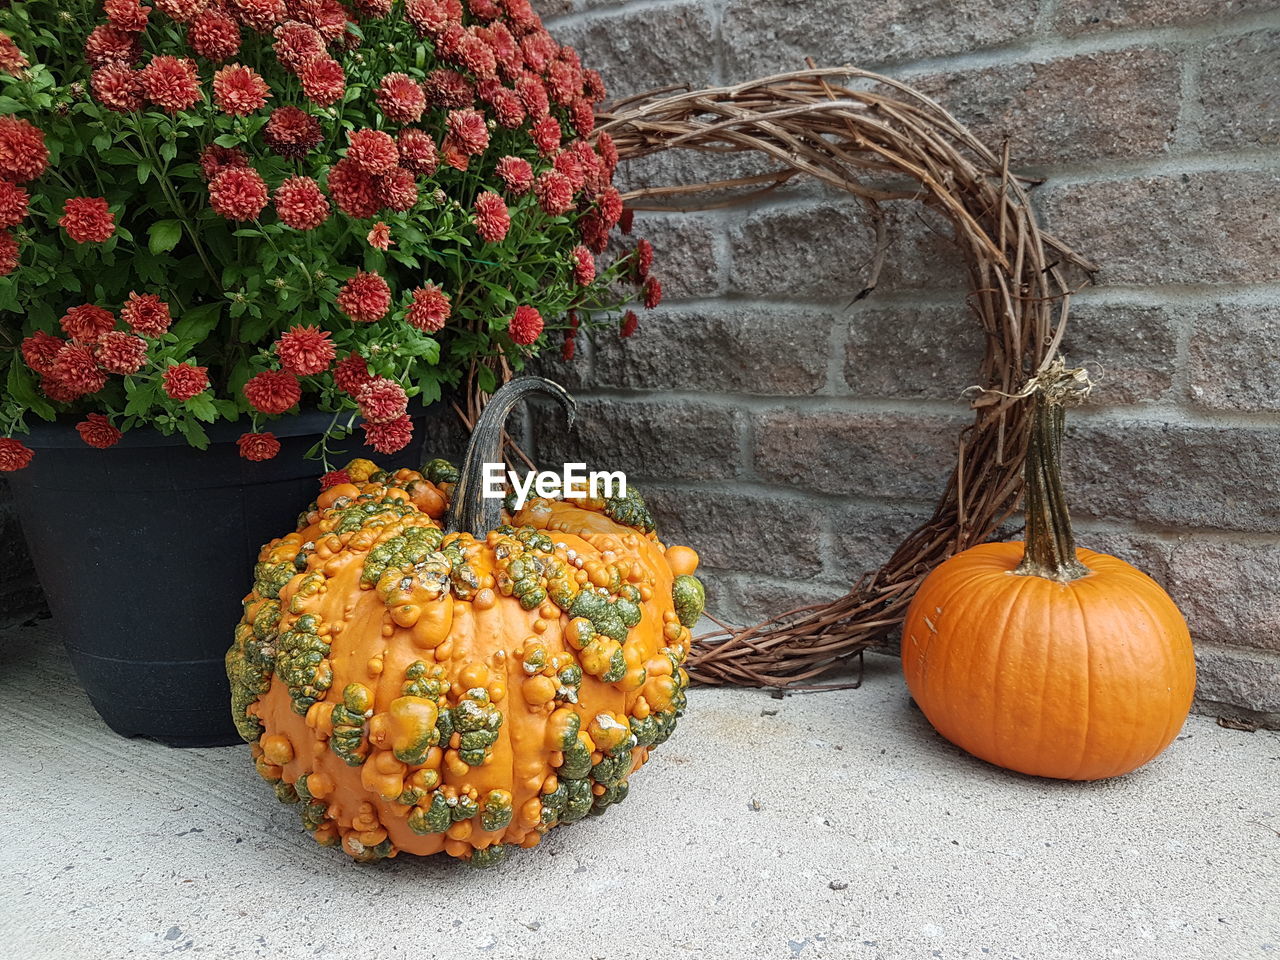 View of pumpkins against wall with vine wreath and chrysanthemum flowers.